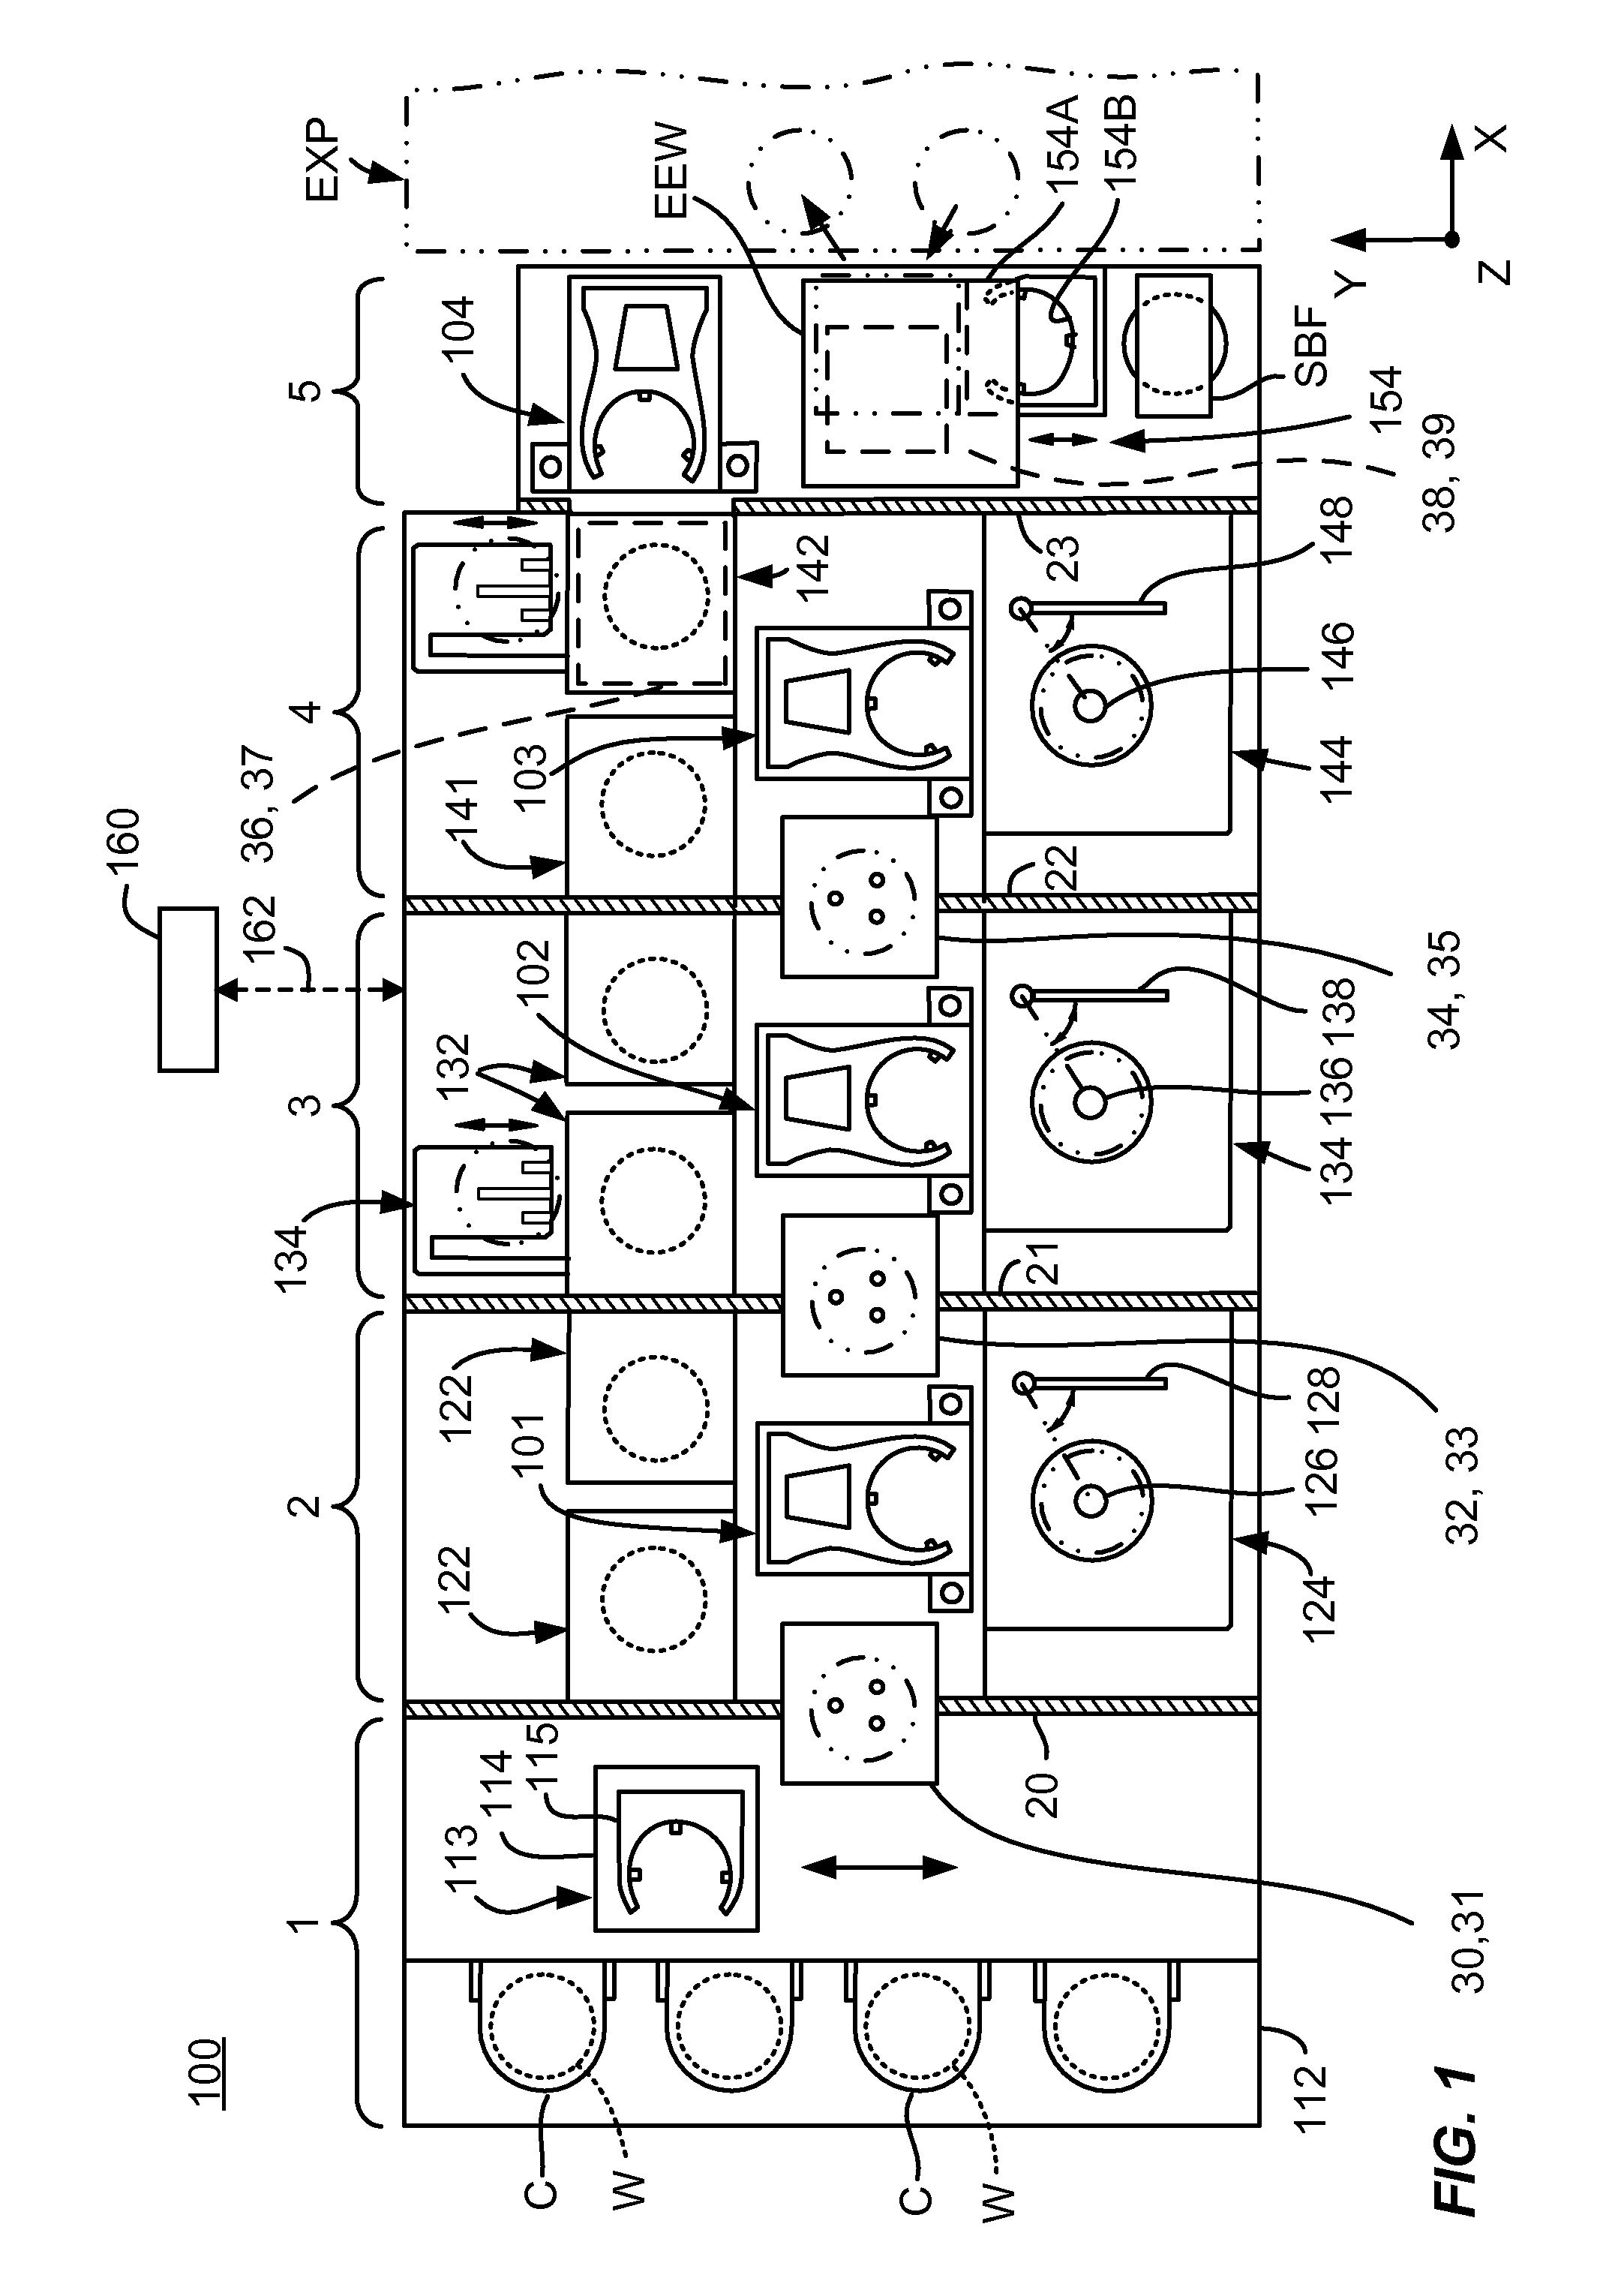 Method and apparatus for providing wafer centering on a track lithography tool